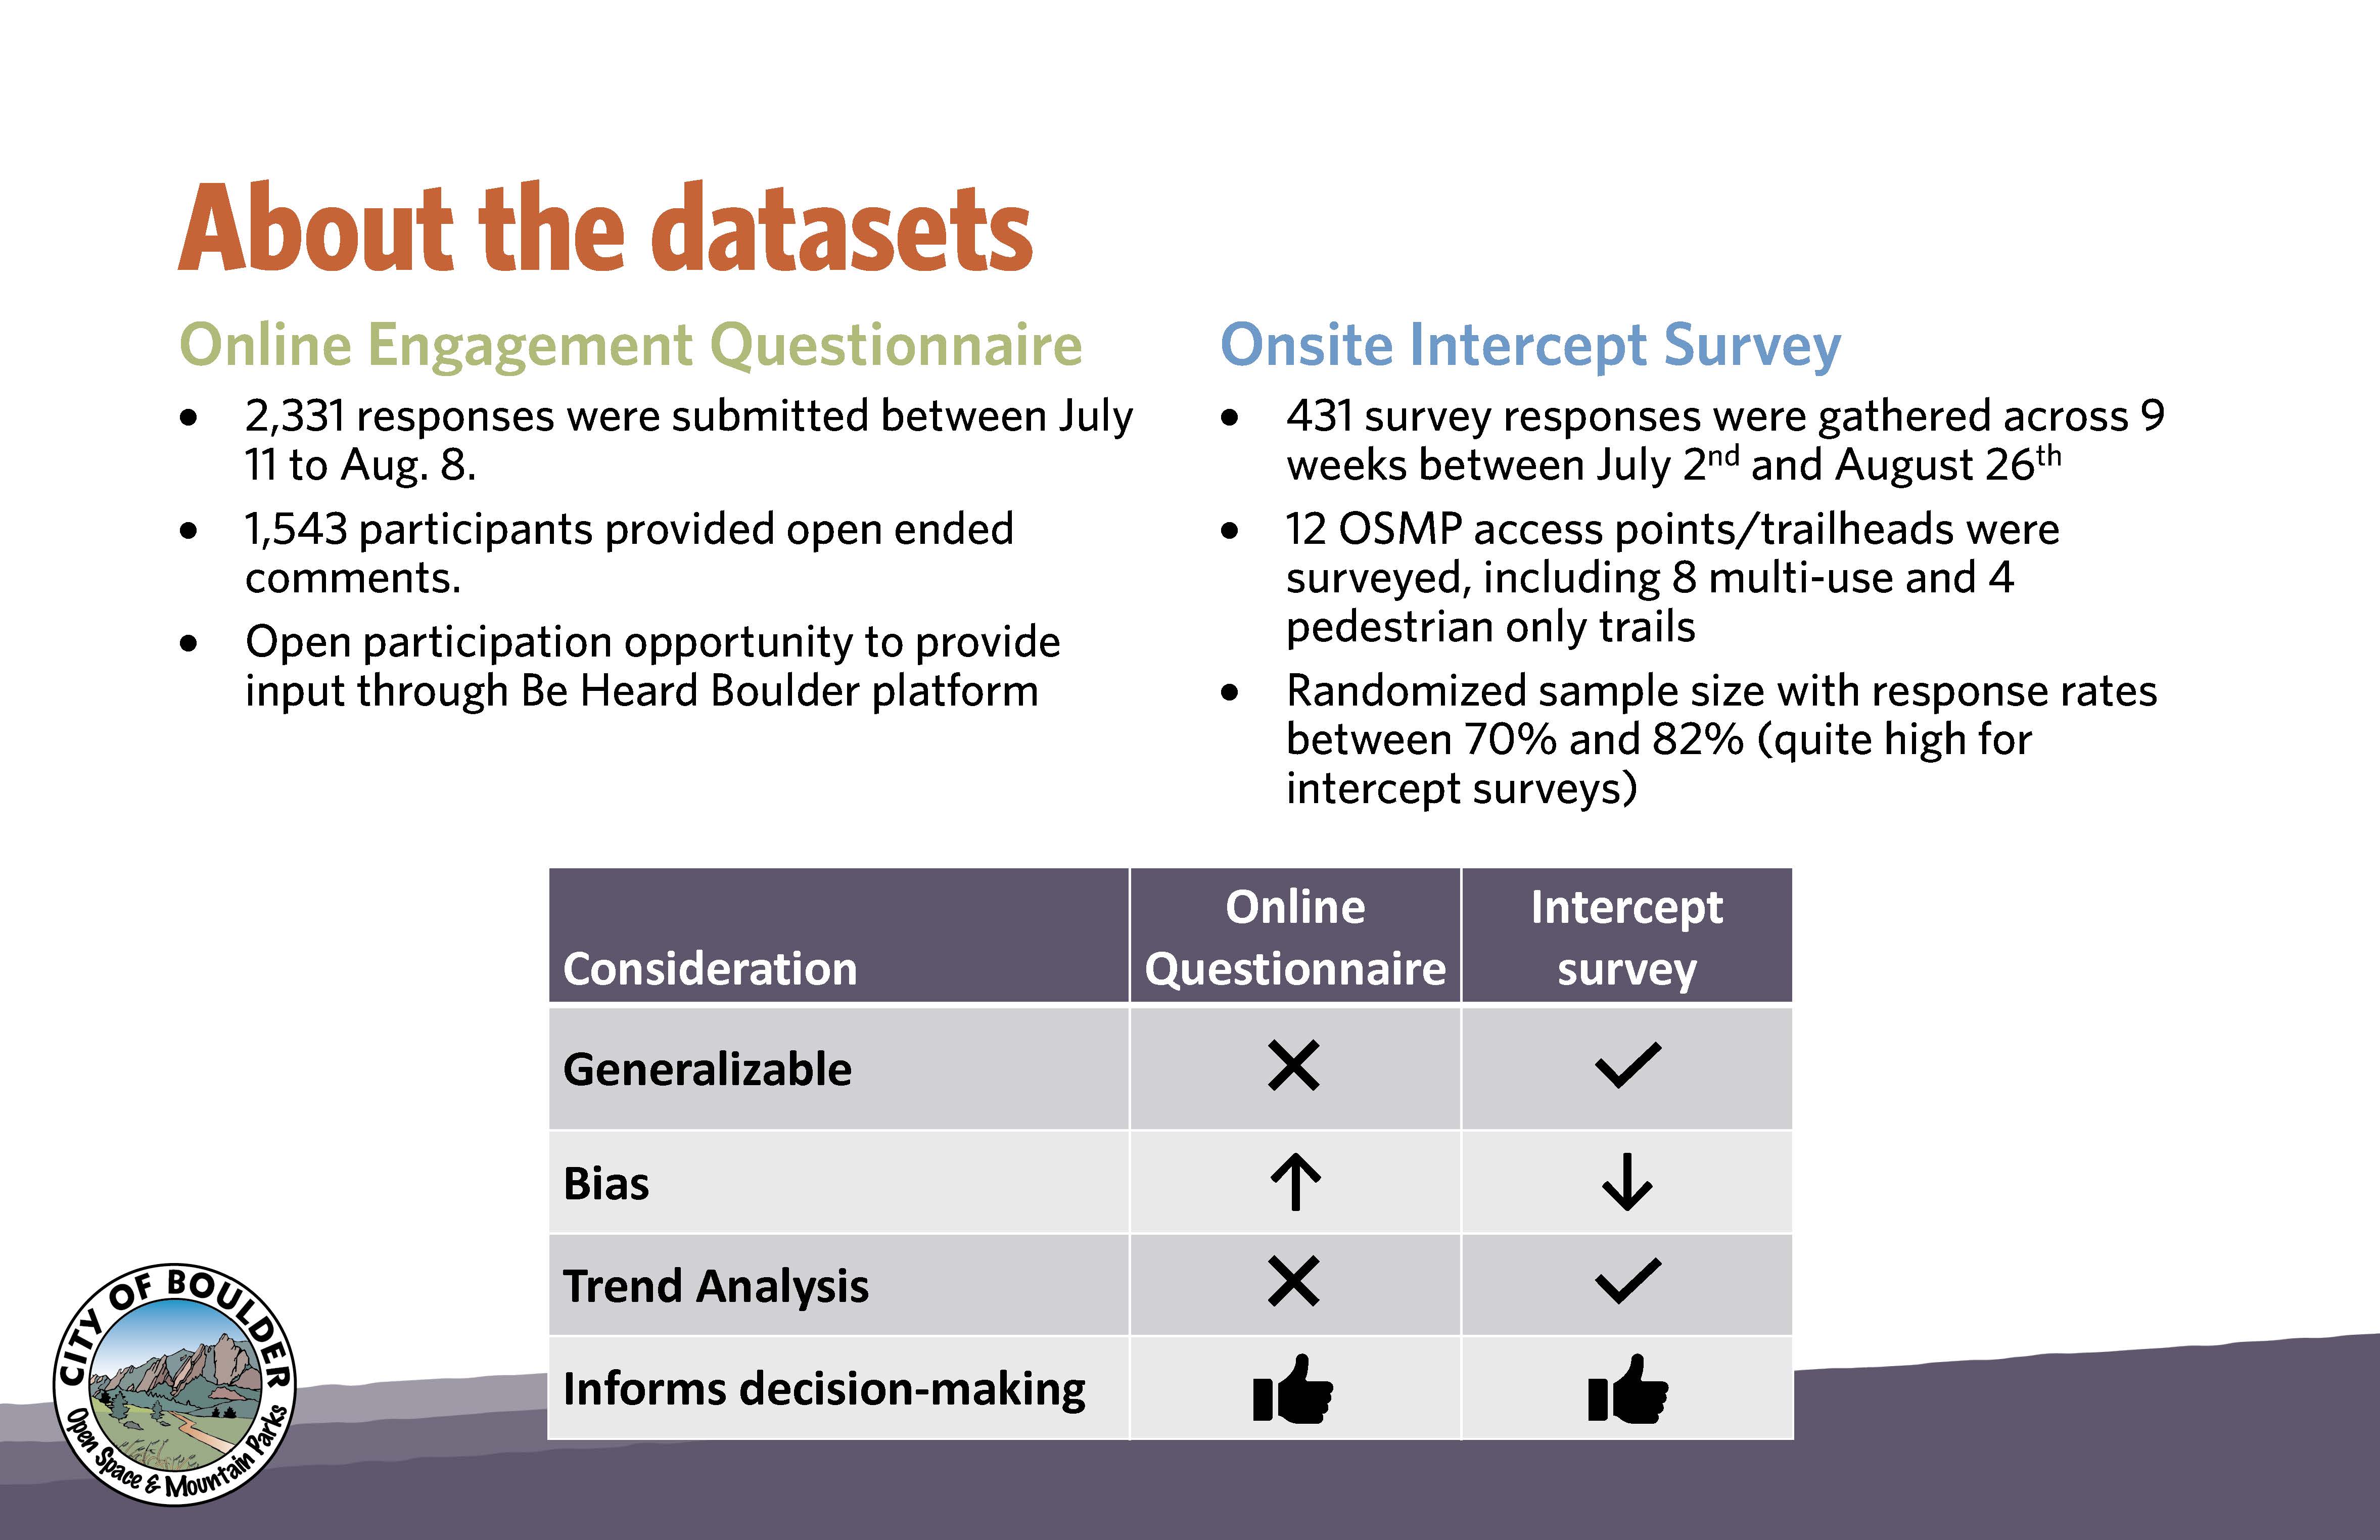 Differences between the Online Questionnaire and Intercept Survey datasets